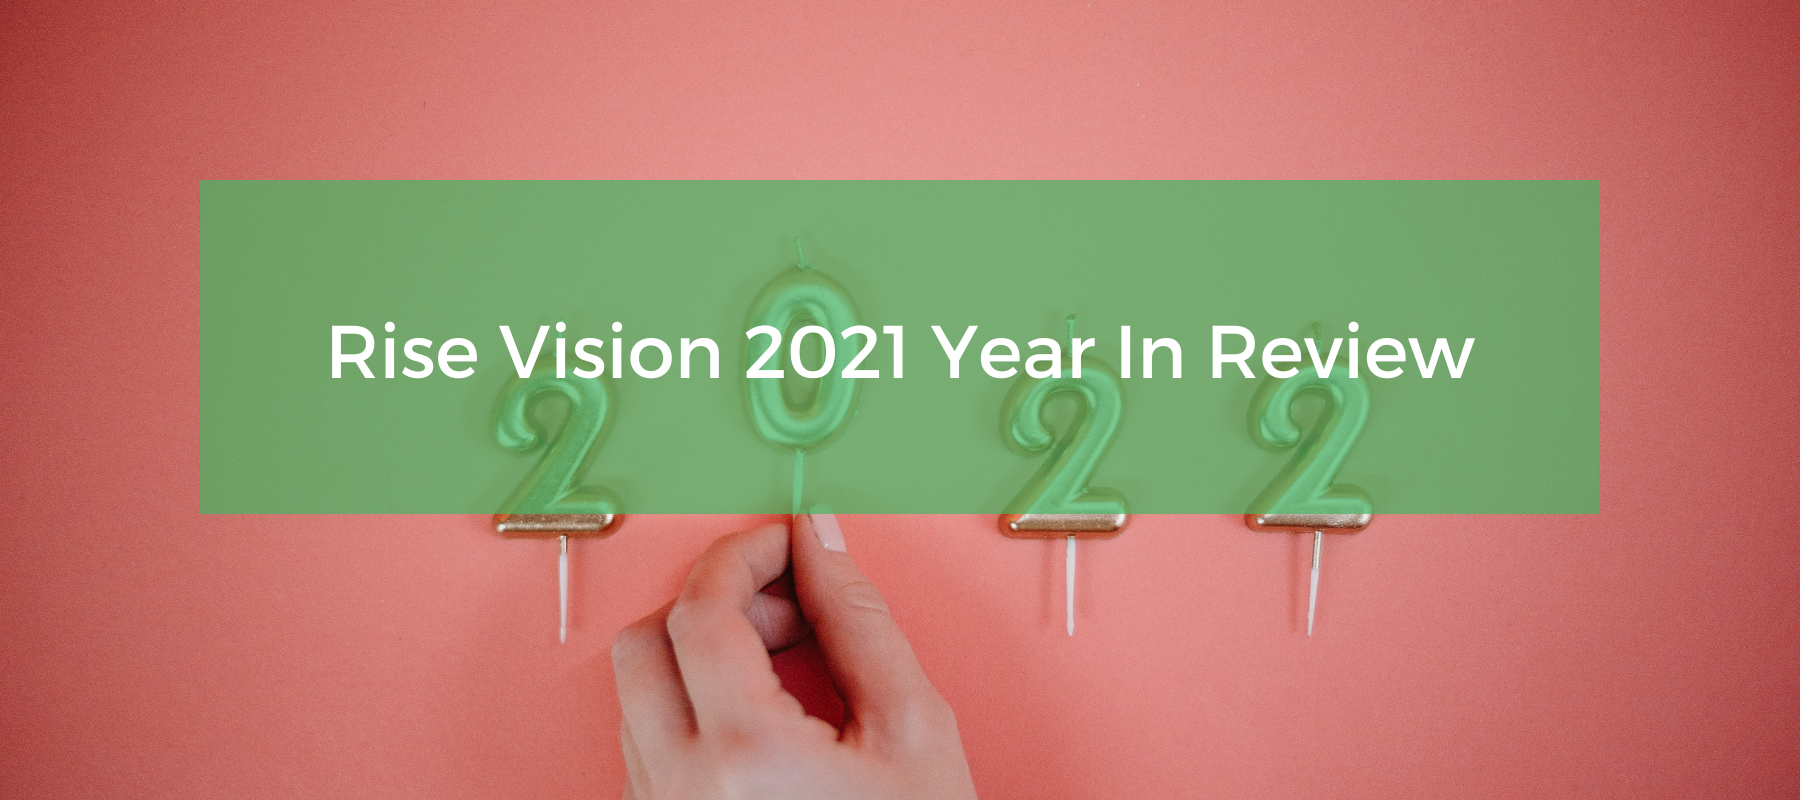 Rise Vision 2021 Year In Review Featured Image